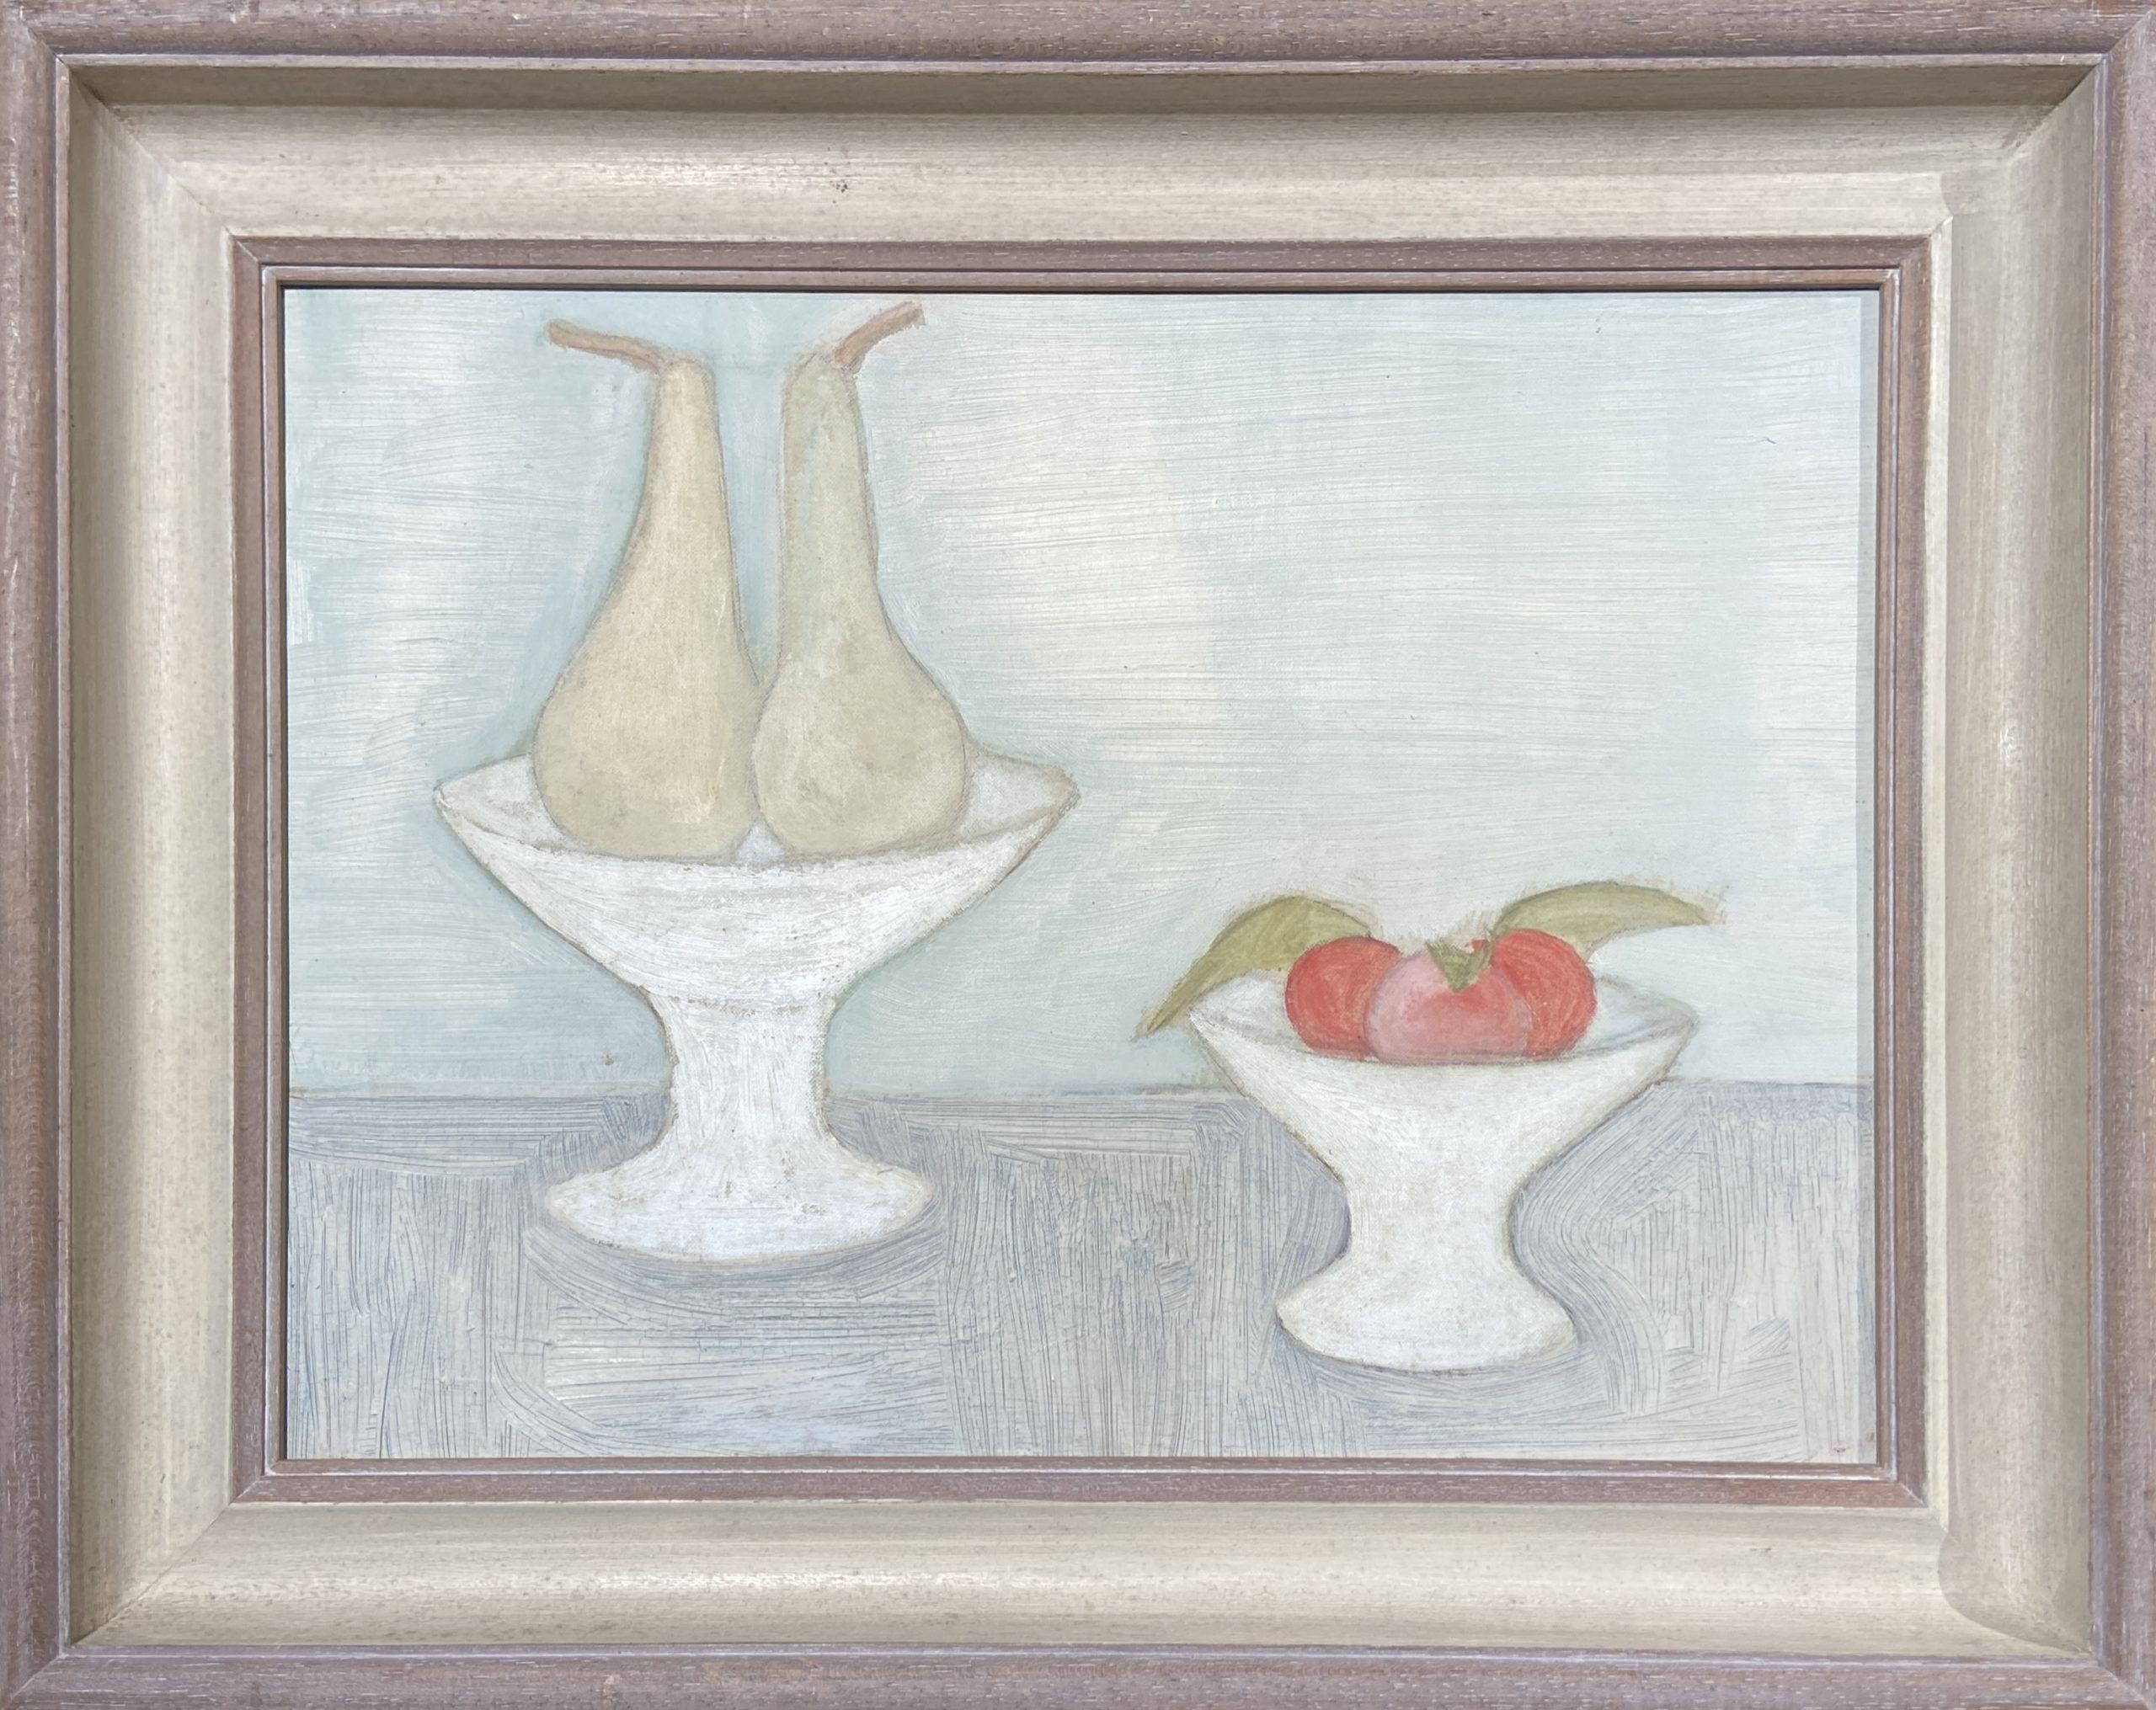 Oil and Polyviny on board, signed on reverse
Image size: 15 1/2 x 11 3/4 inches (39.5 x 30 cm)
Original frame


Exhibited
Pictures for Scottish Schools, 1967

Elspeth Spottiswood

Born in Aberdeenshire, the painter Elspeth Spottiswood was a solitary